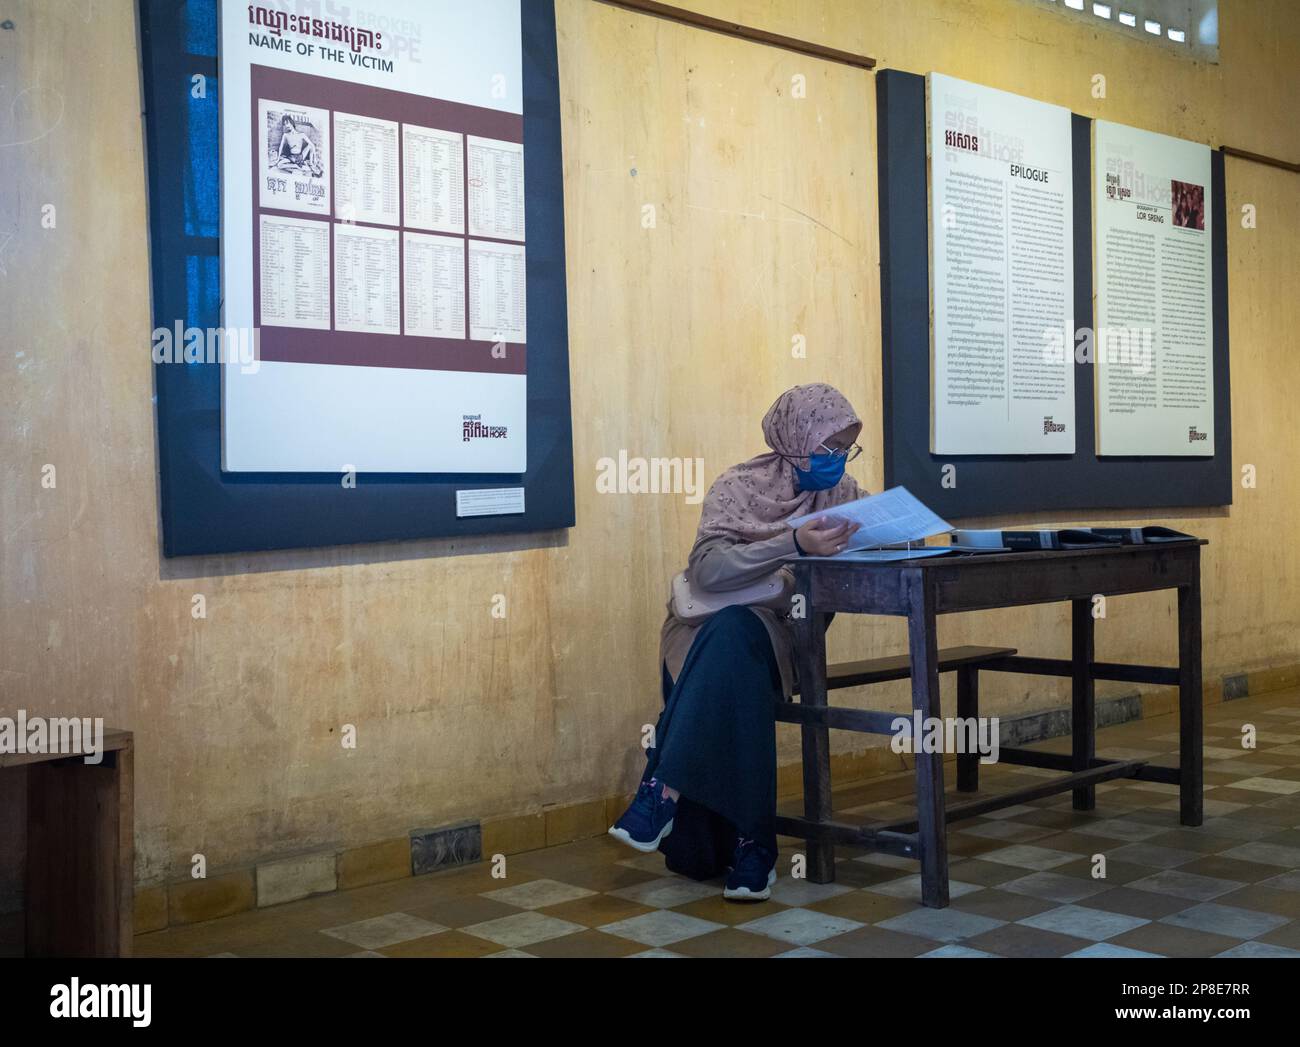 A Cambodian muslim woman reads testimonies in a former classroom in the notorious Tuol Sleng S-21 torture and genocide prison museum in Phnom Penh, C Stock Photo